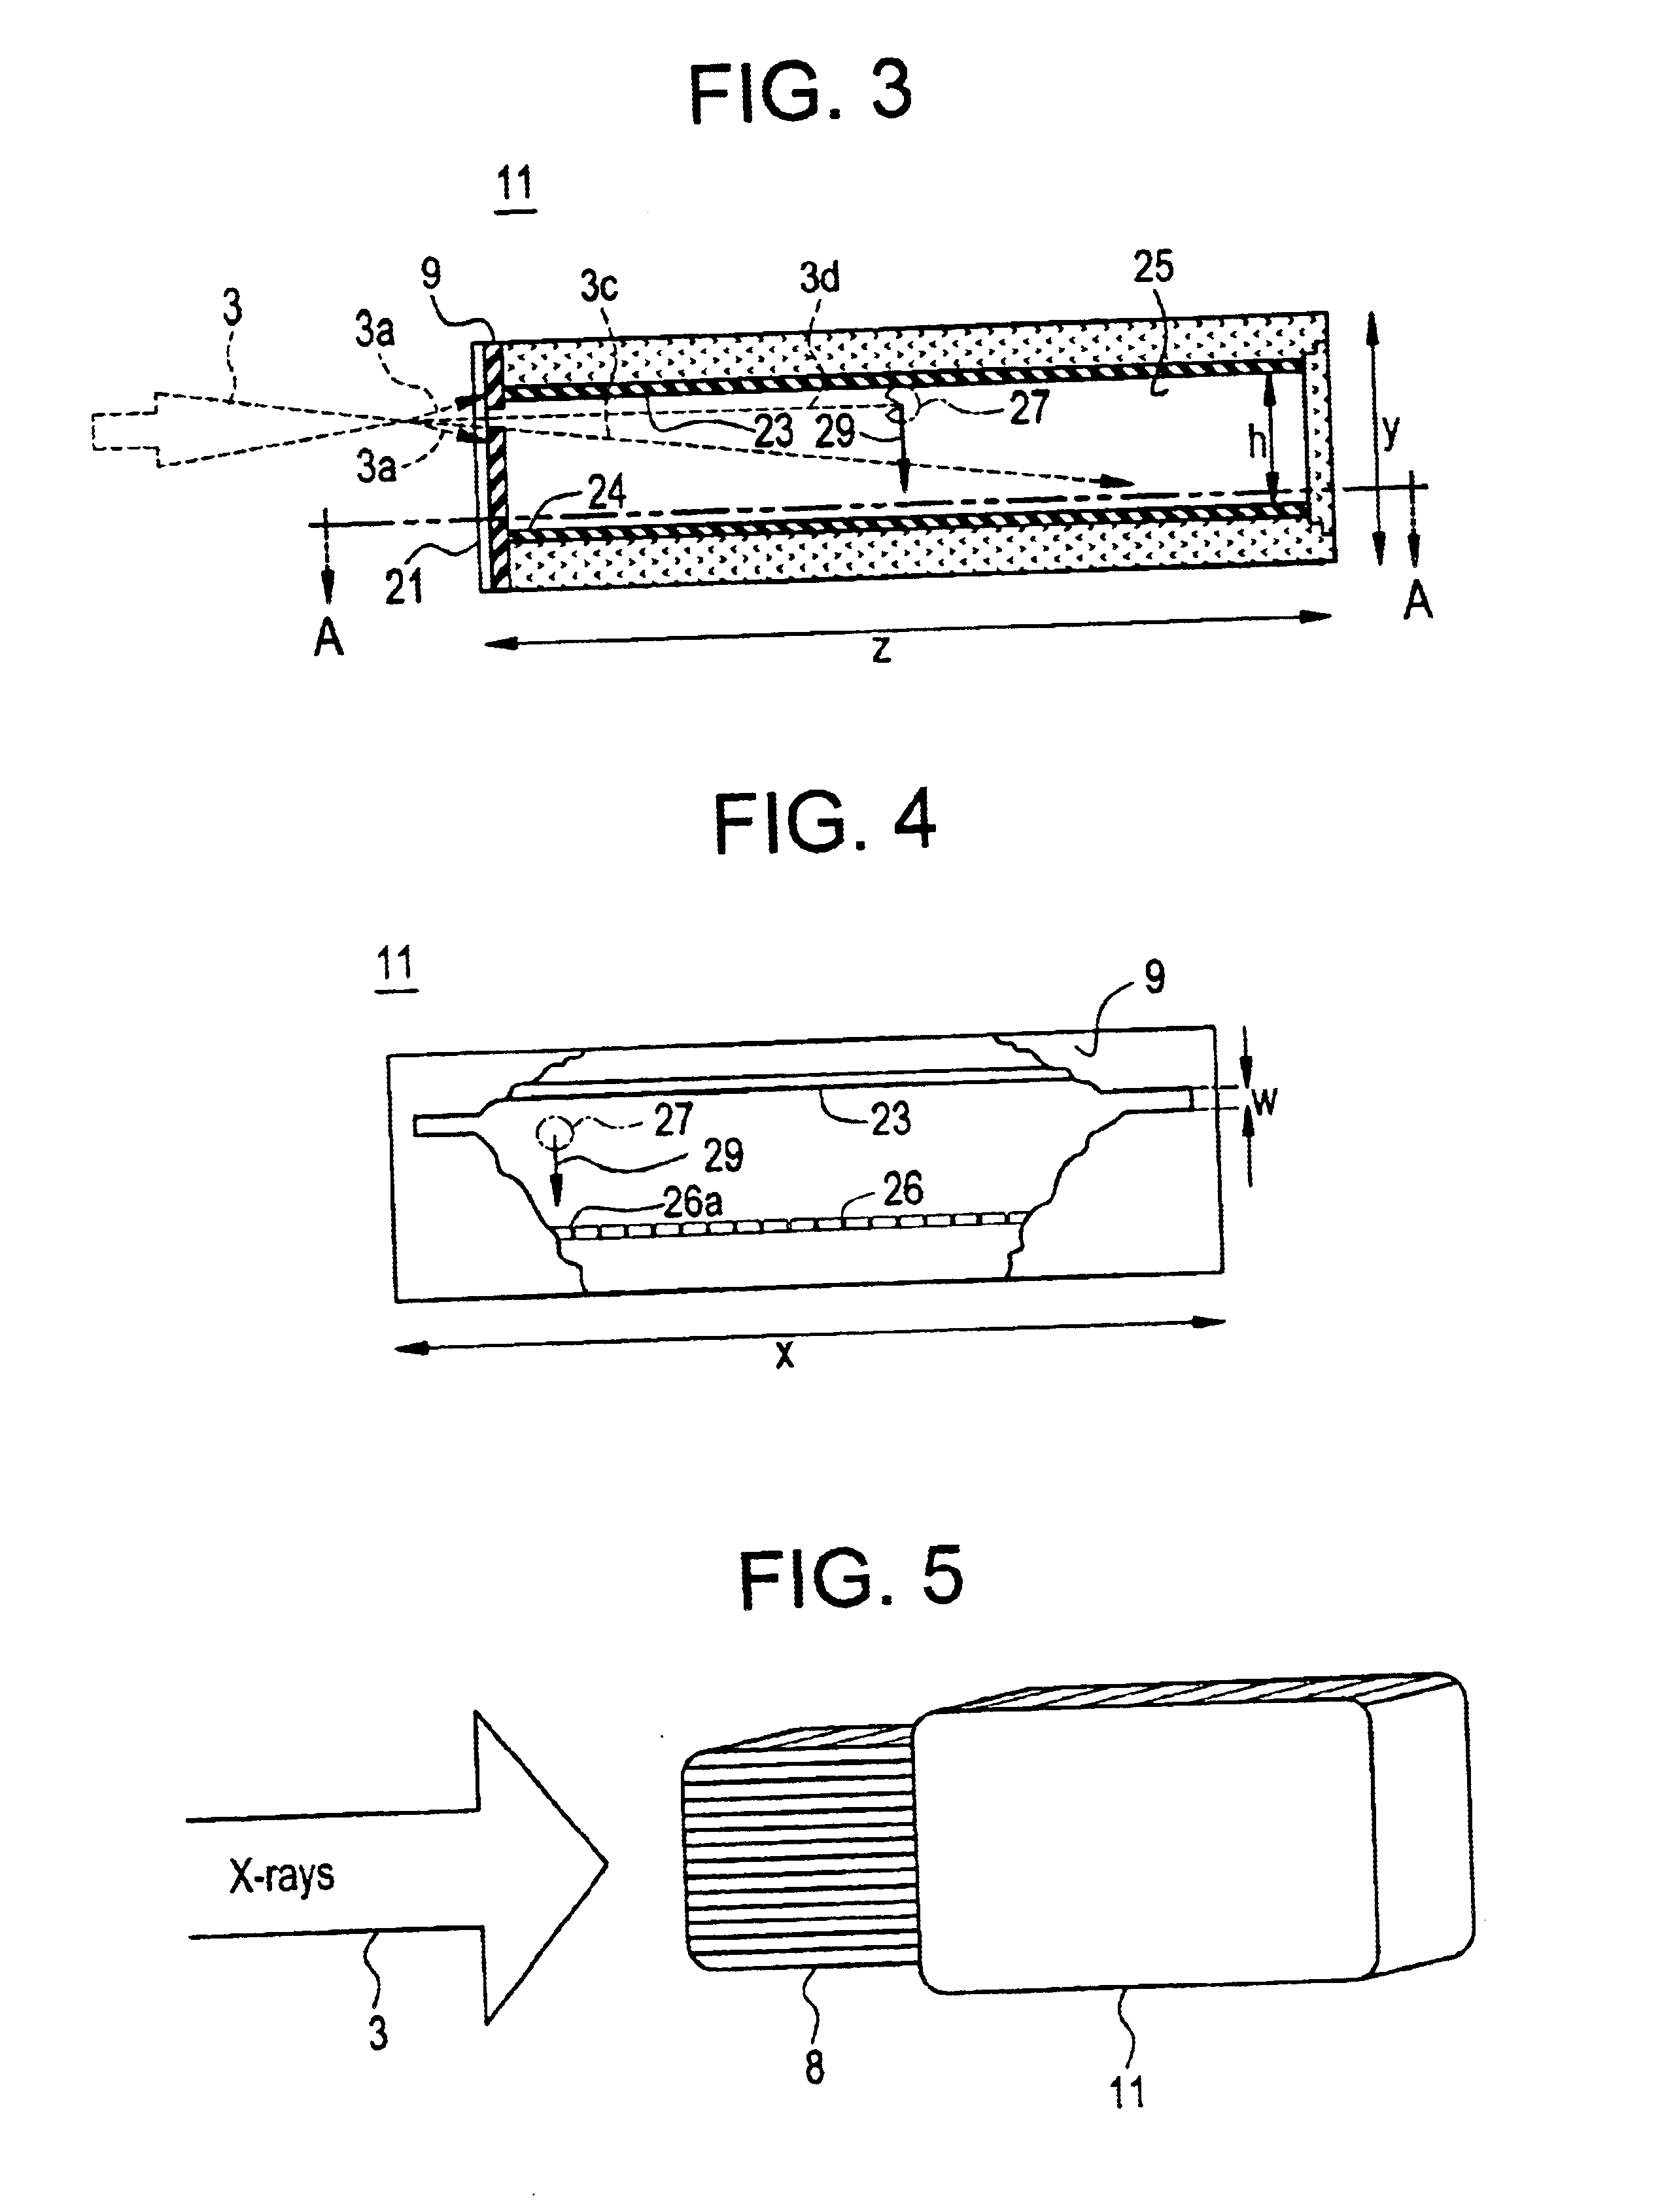 Method and apparatus for detection of ionizing radiation